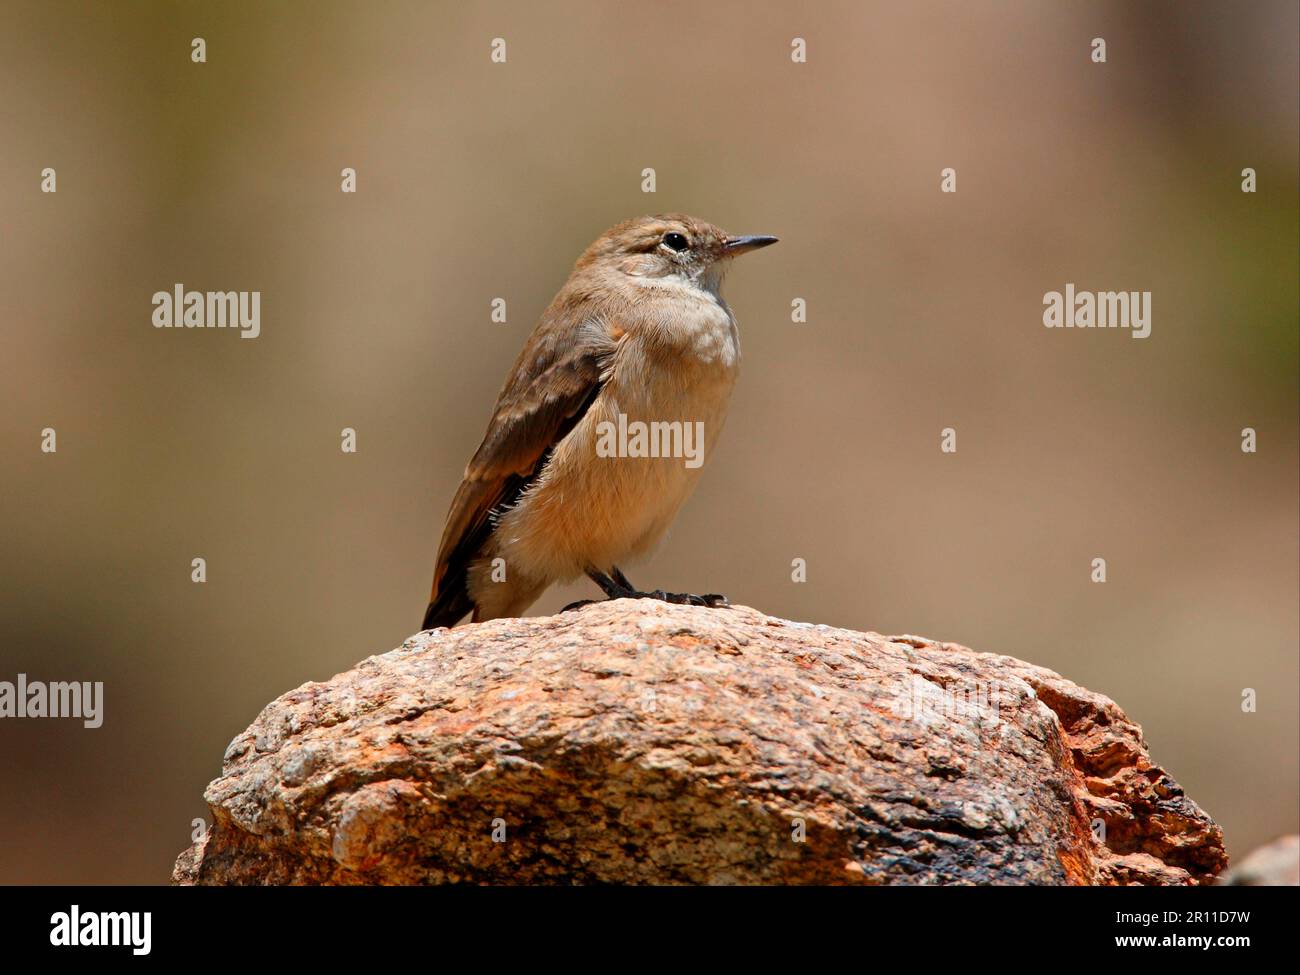 Red-tailed Miner, Pottery Bird, Pottery Birds, Animals, Birds, Rufous-banded Miner (Geositta rufipennis) adult, standing on rock, Jujuy, Argentina Stock Photo